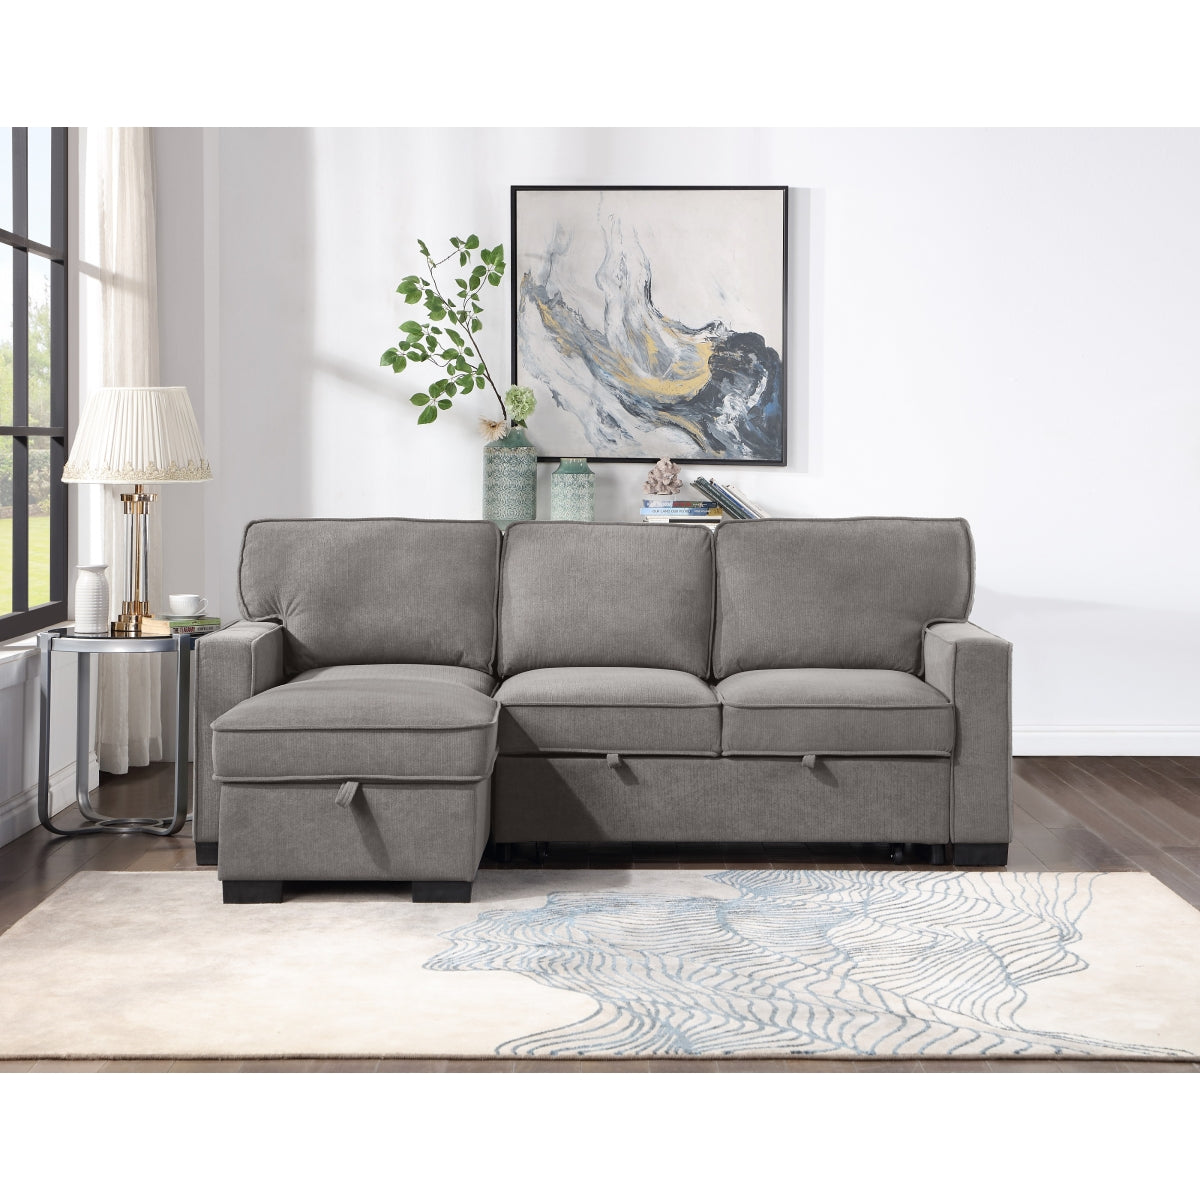 SH8891GRY* 2PC SECTIONAL W/ PULL-OUT BED &amp; LAF CHAISE WITH STORAGE